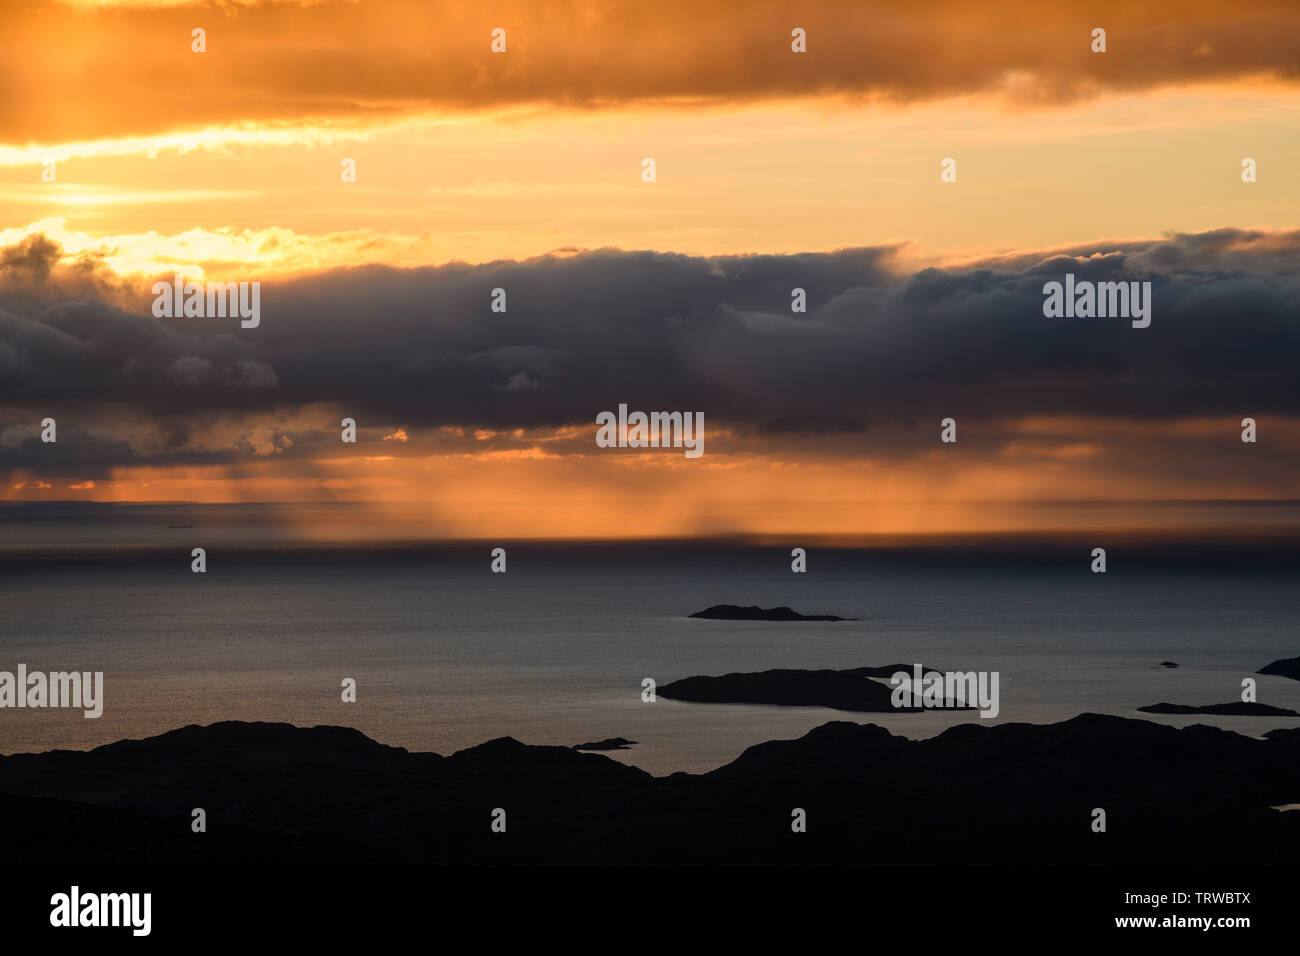 Rain shower and sunset, View from Stac Pollaidh, Coigach peninsula, Wester Ross, Highlands, Scotland Stock Photo